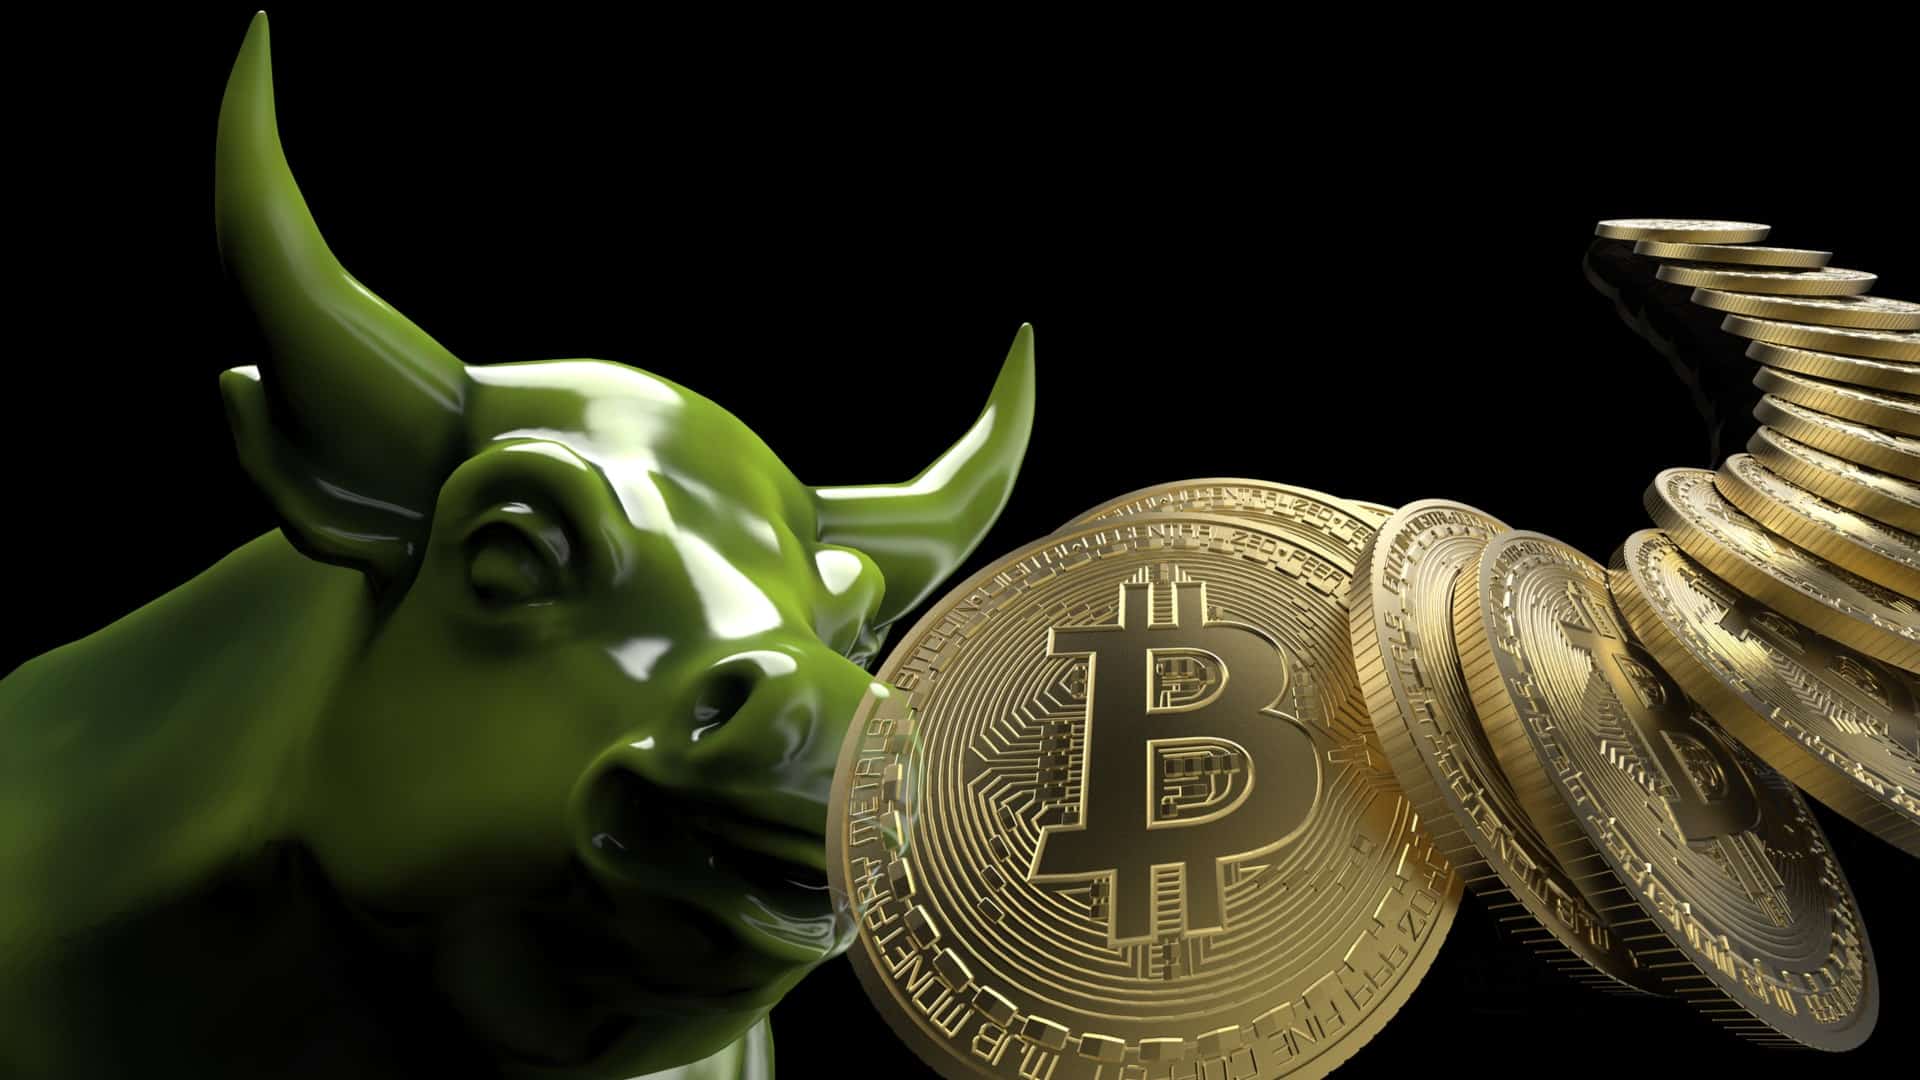 BTC is officially the most profitable asset in 2021